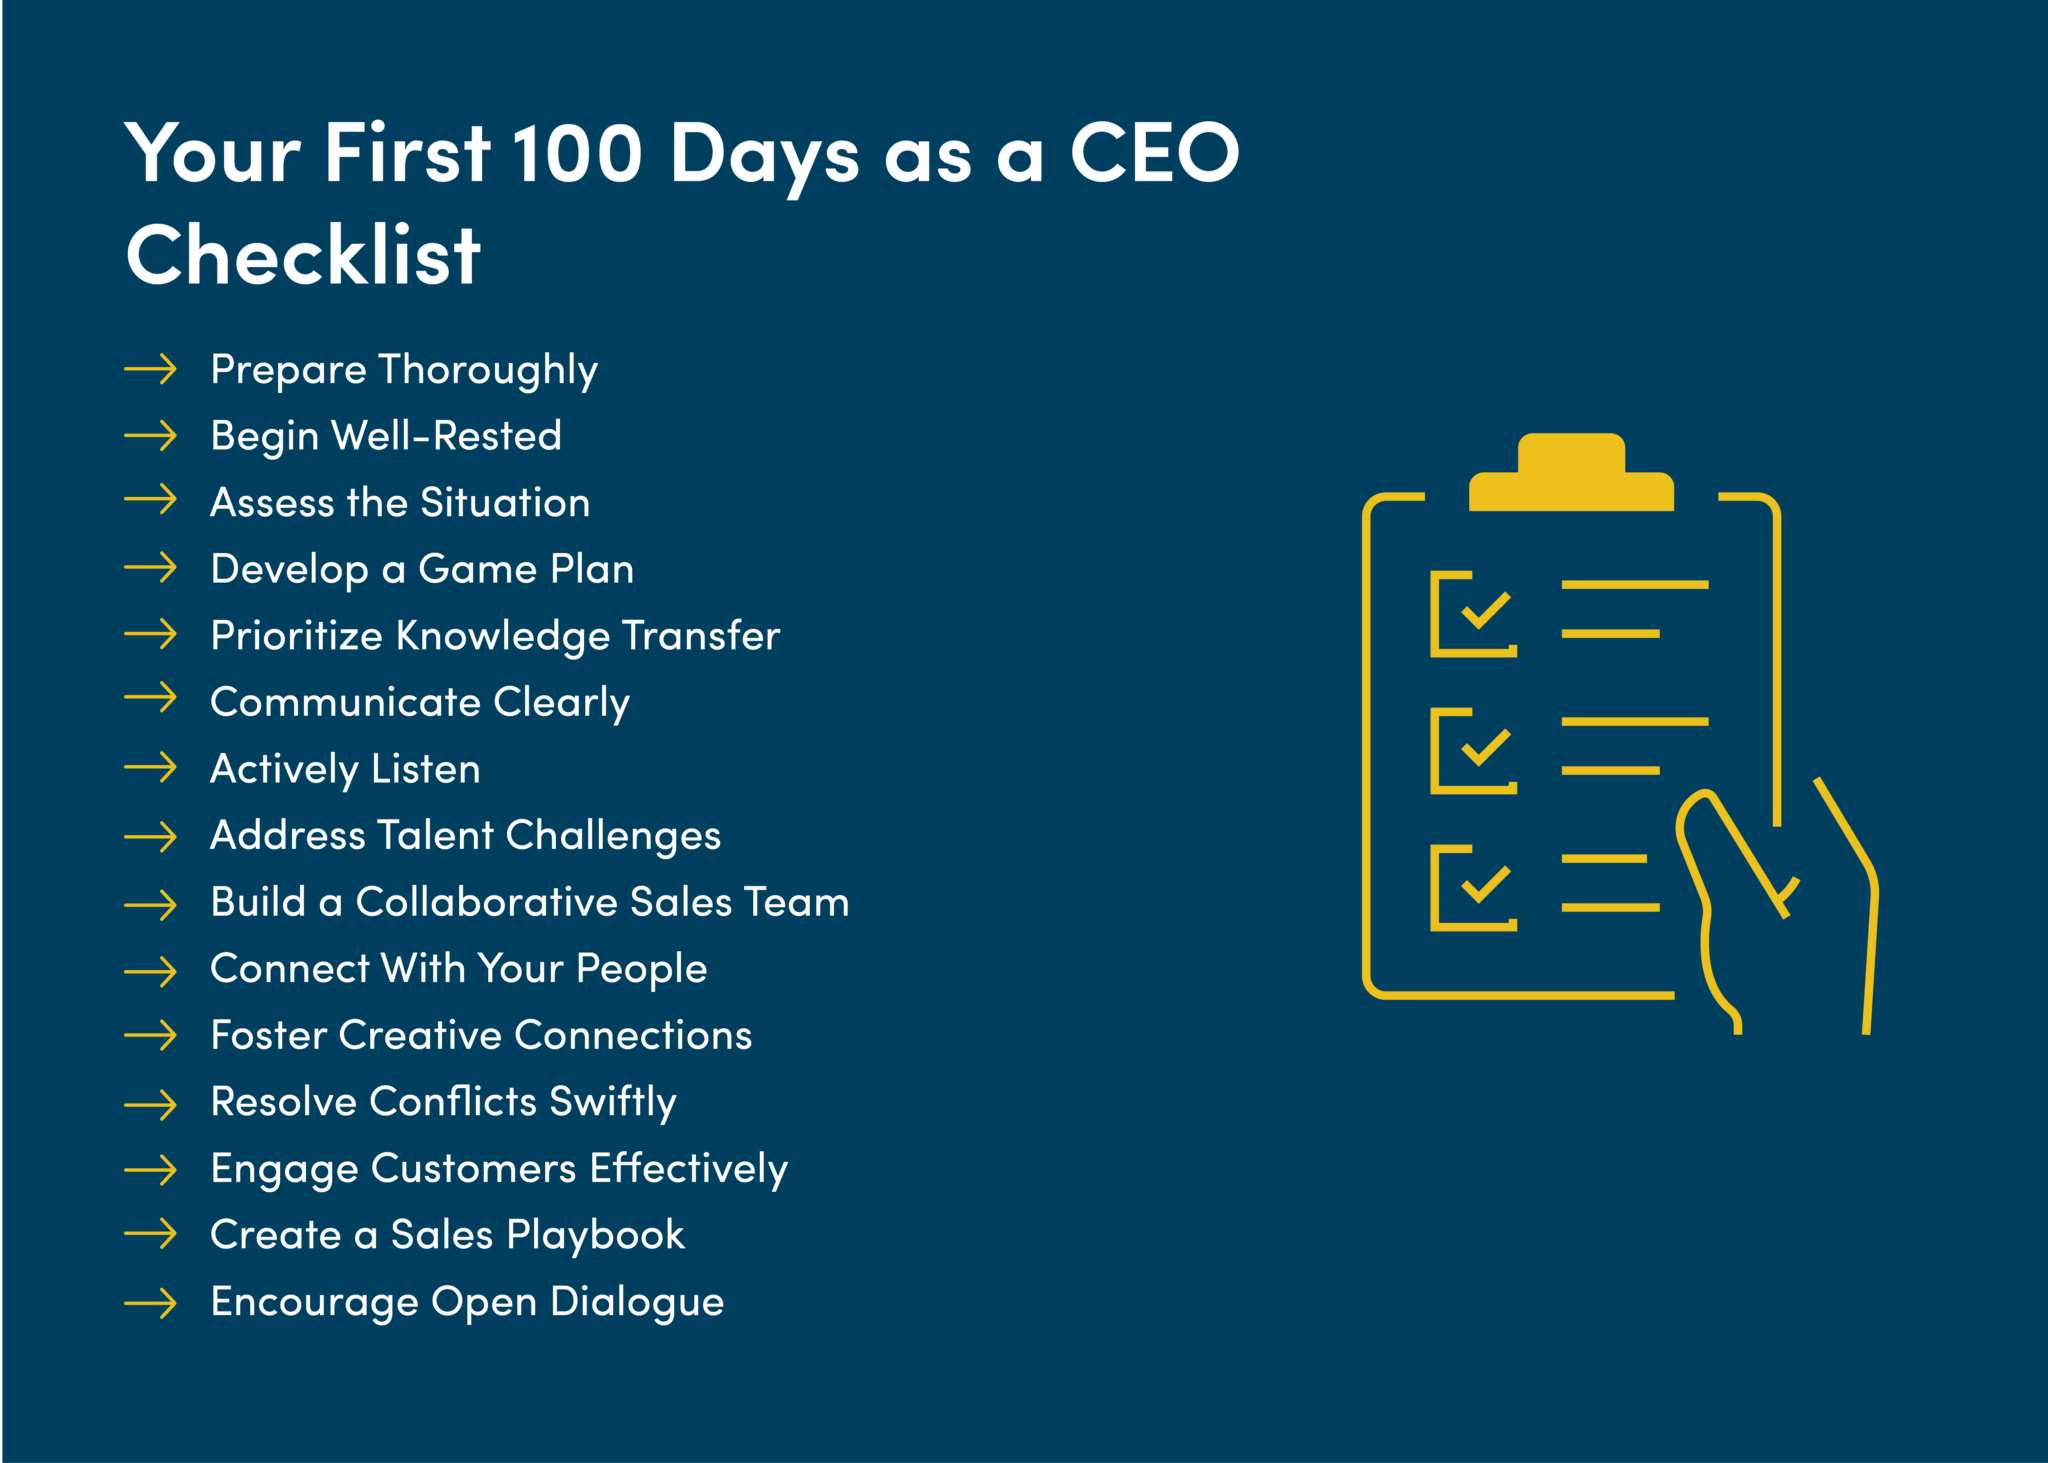 Your first 100 days as a CEO checklist